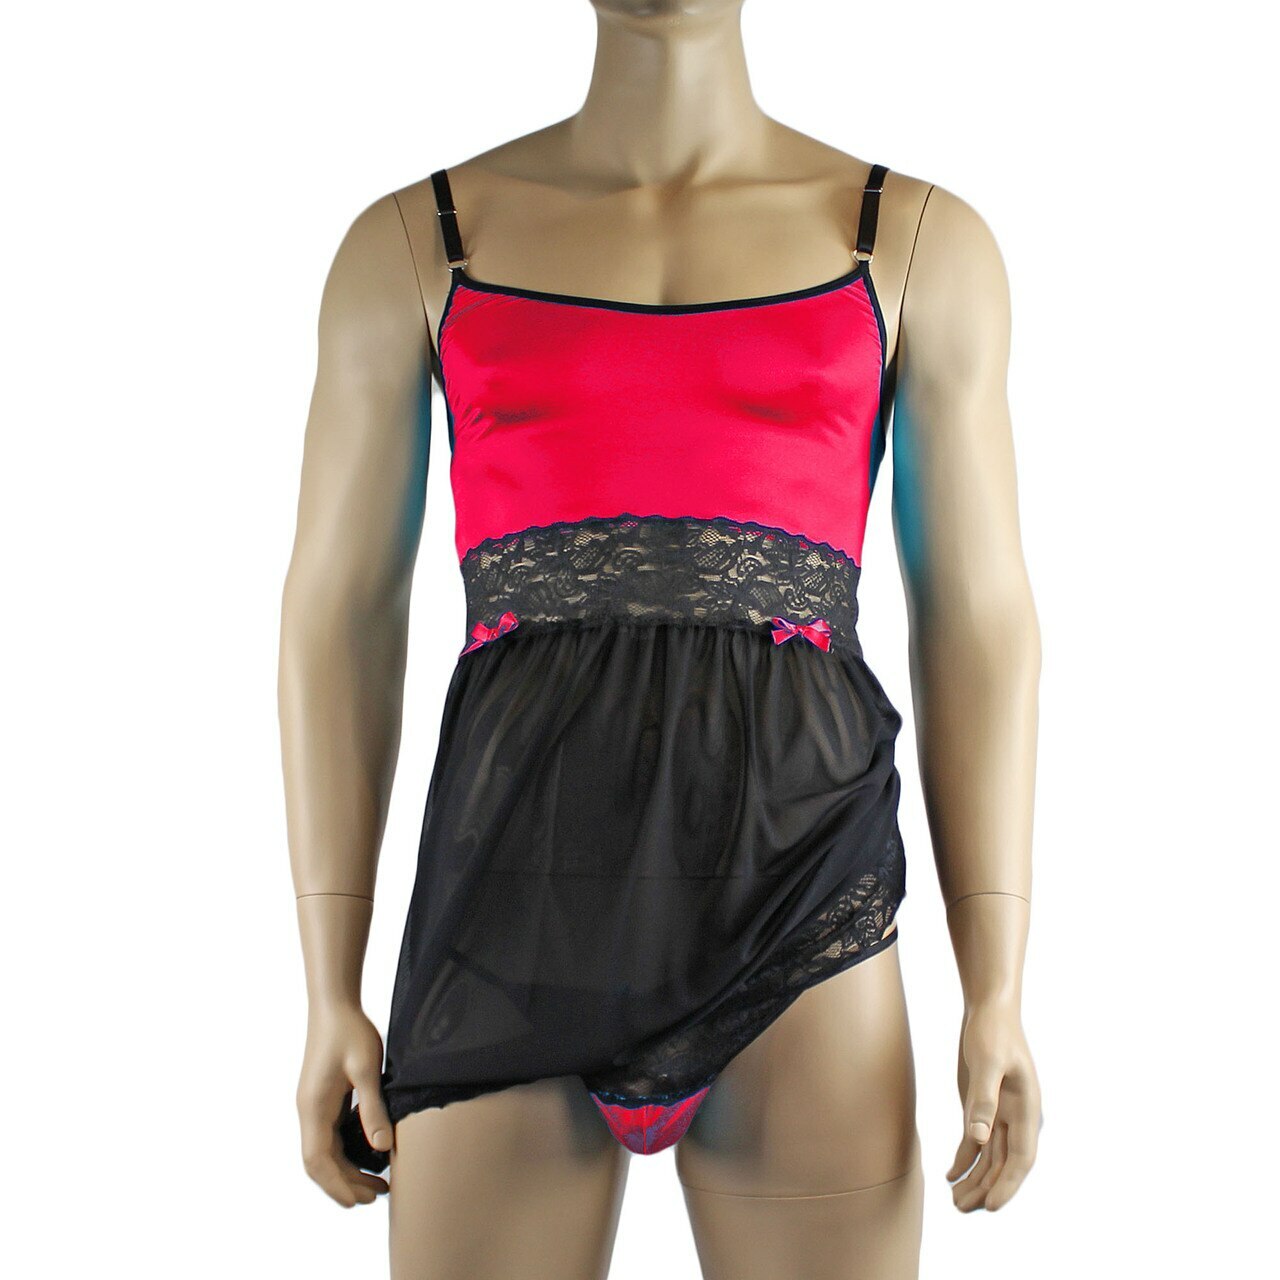 Mens Joanne Sexy Lingerie Nightwear Chemise with G string - Sizes up to 3XL Red & Black